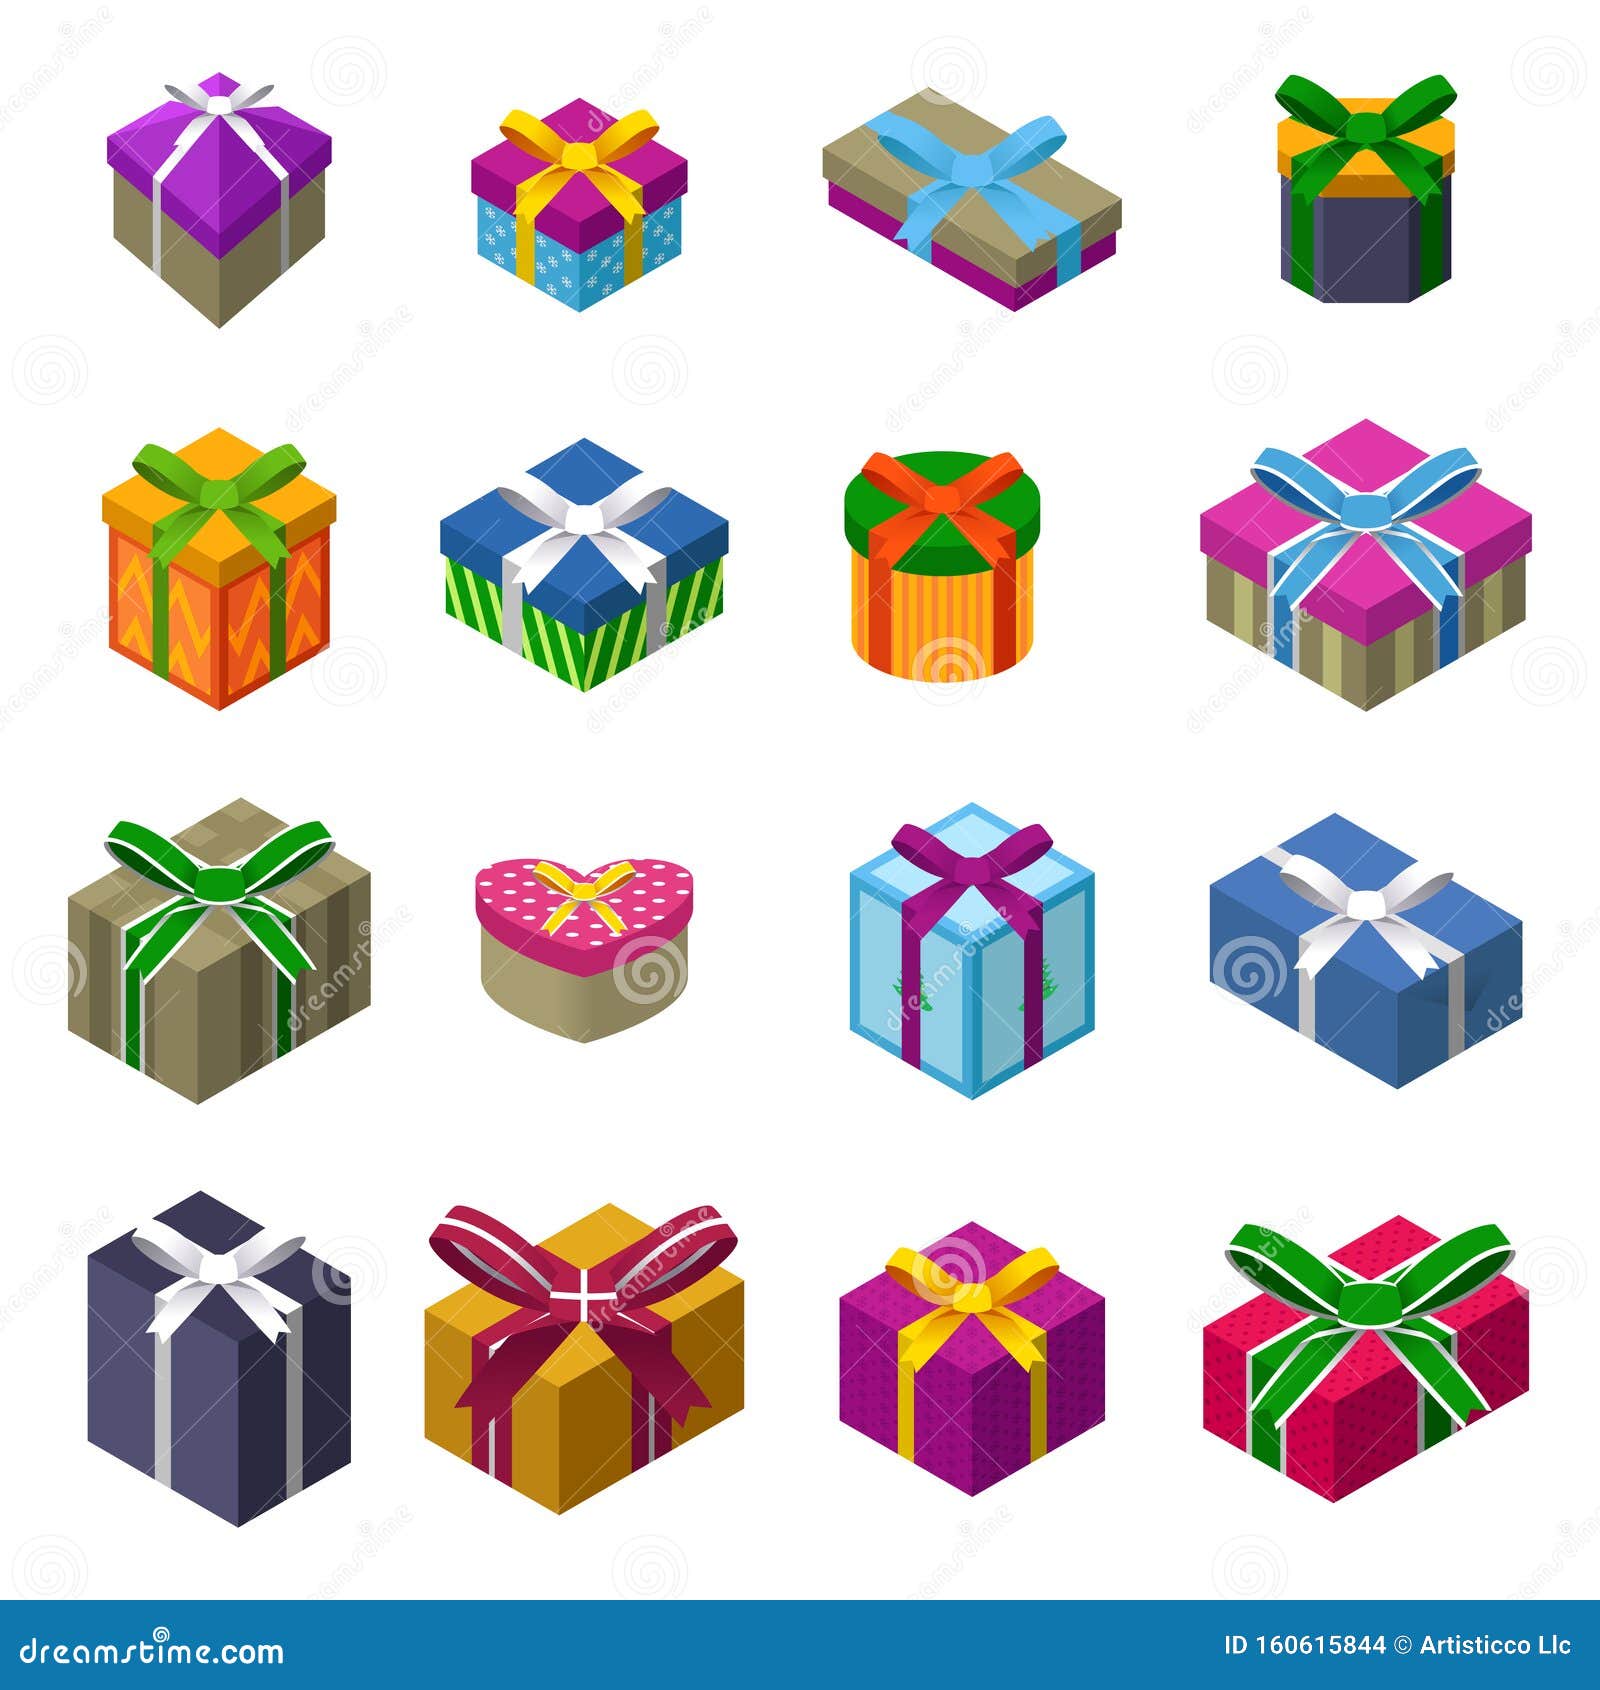 Different Designs Of Christmas Present Boxes Stock Vector - Illustration of celebration ...